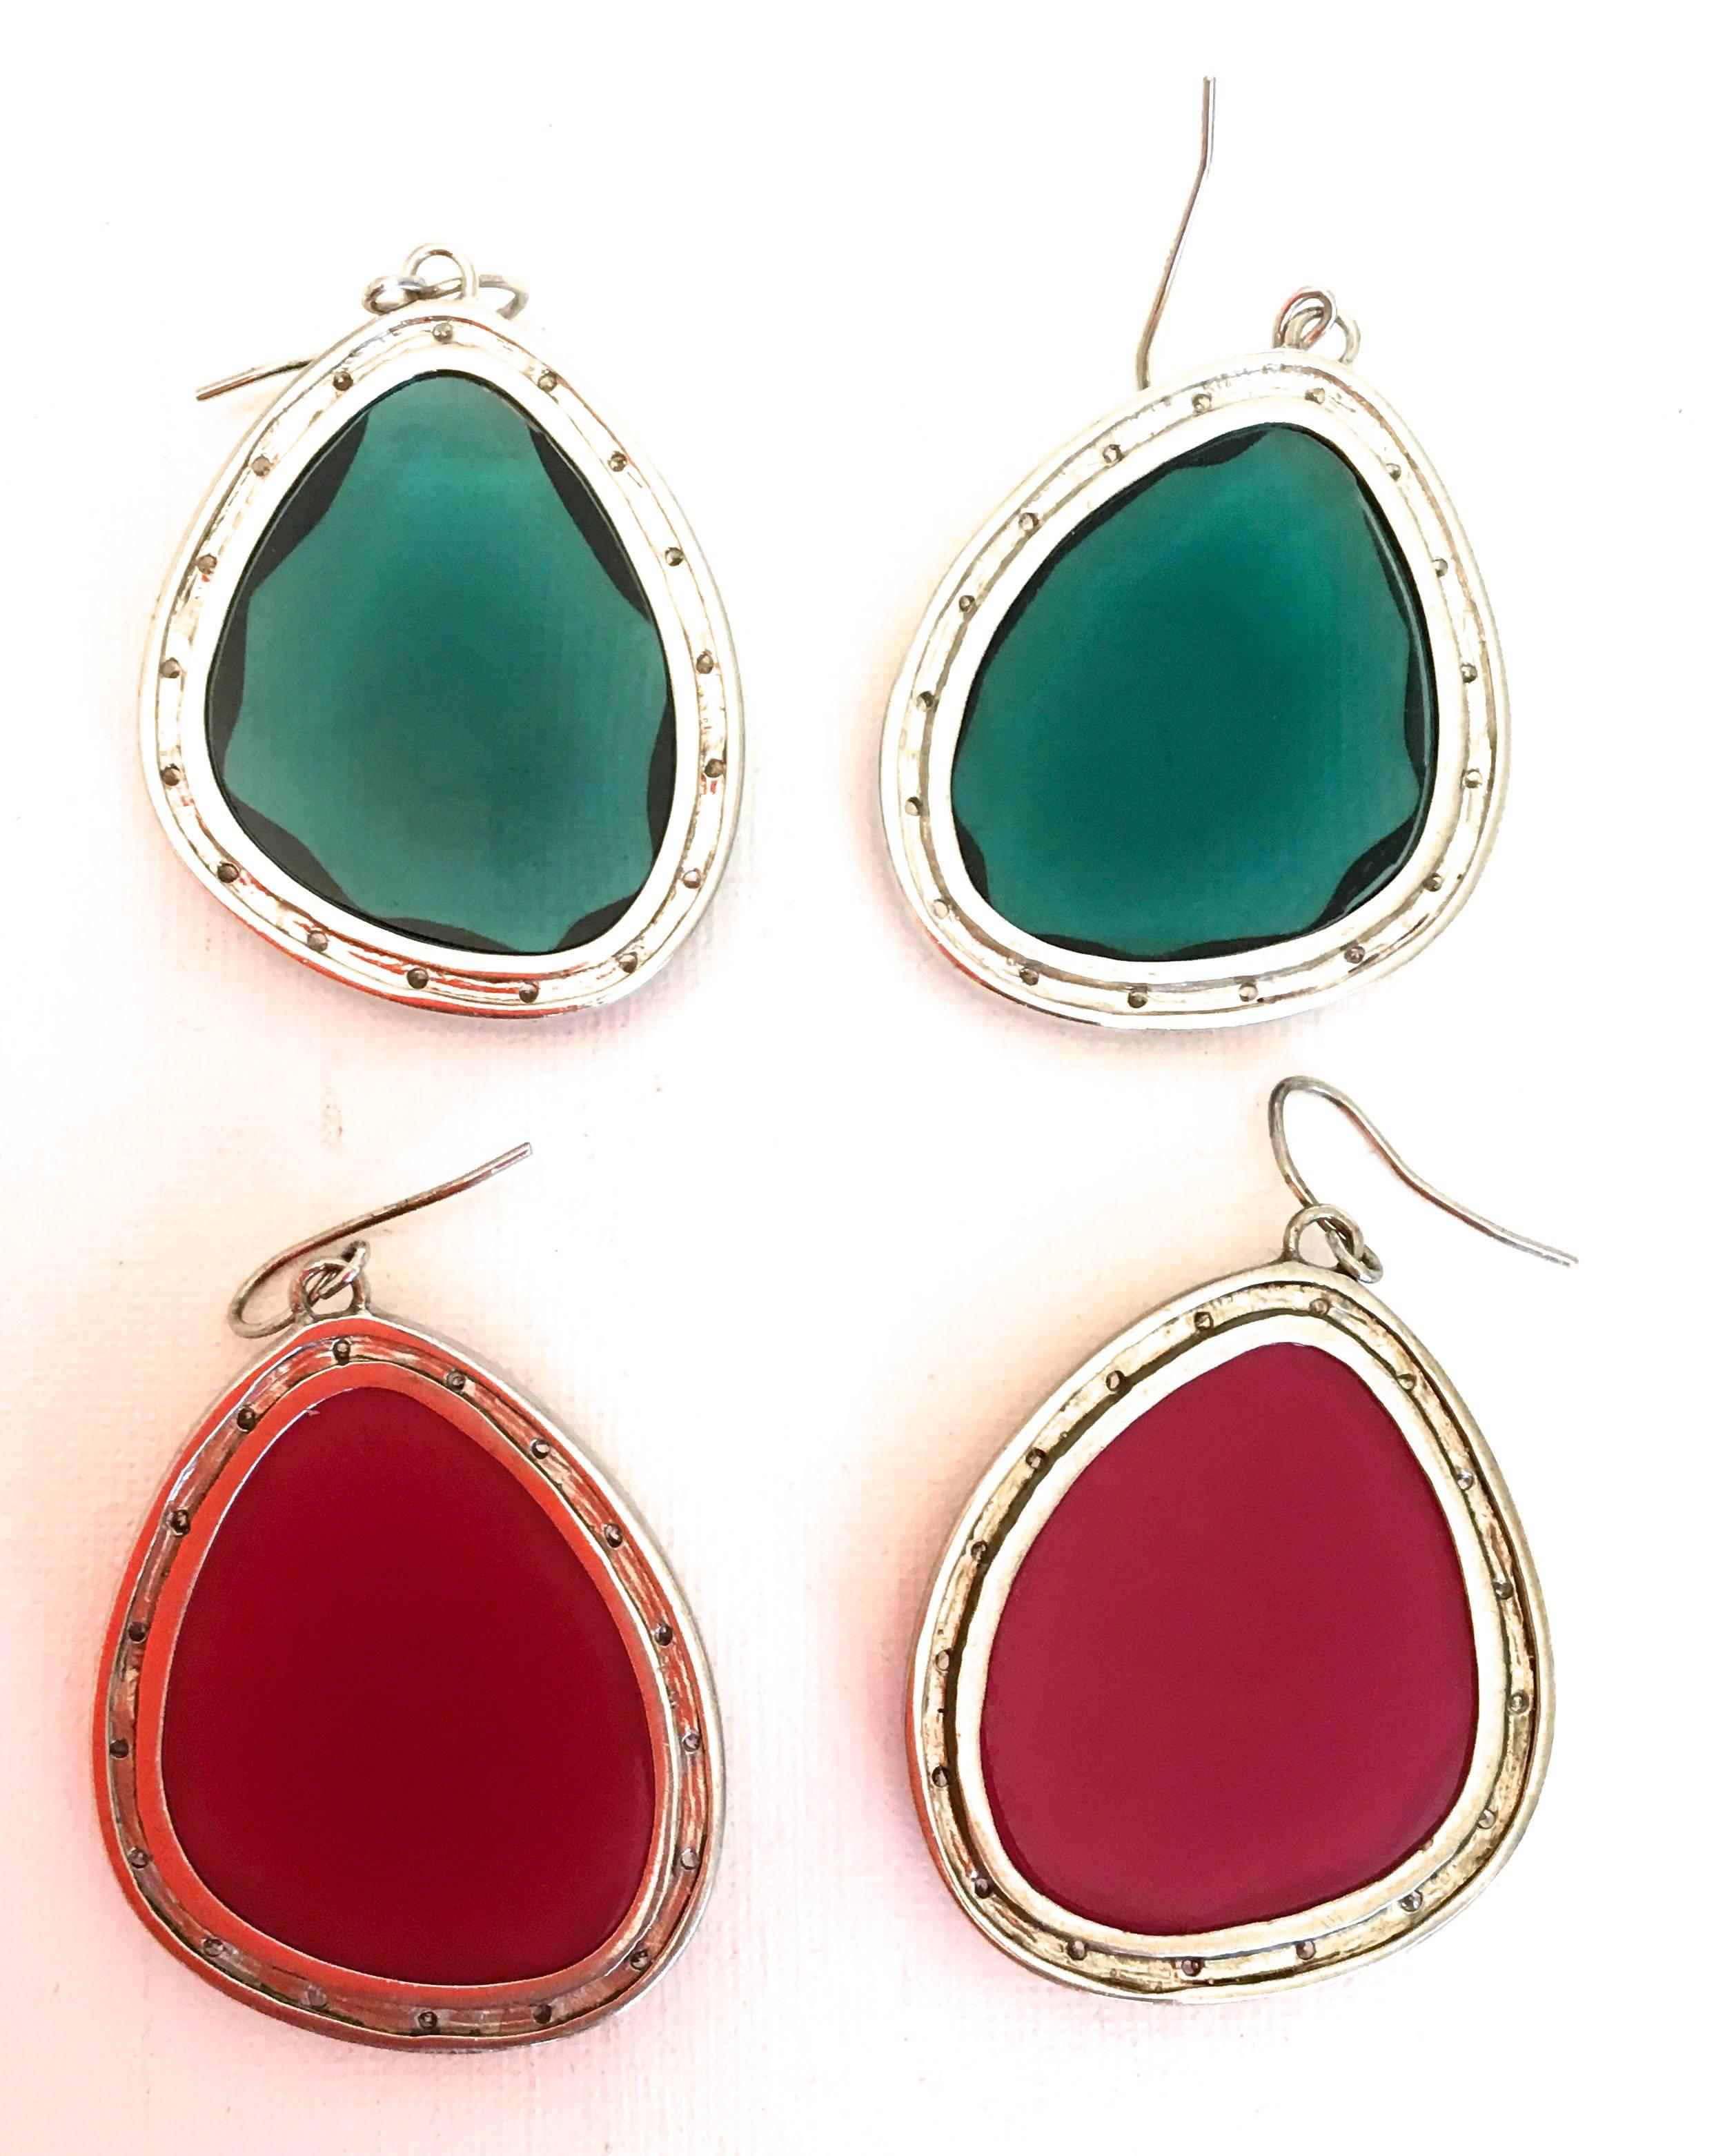 Presented here are two pairs of earrings from Miriam Salat. The earrings are comprised of a sterling silver frame and hook. Inside the frame there is a large colored stone. Around the exterior of the front of each earring there are small cubic